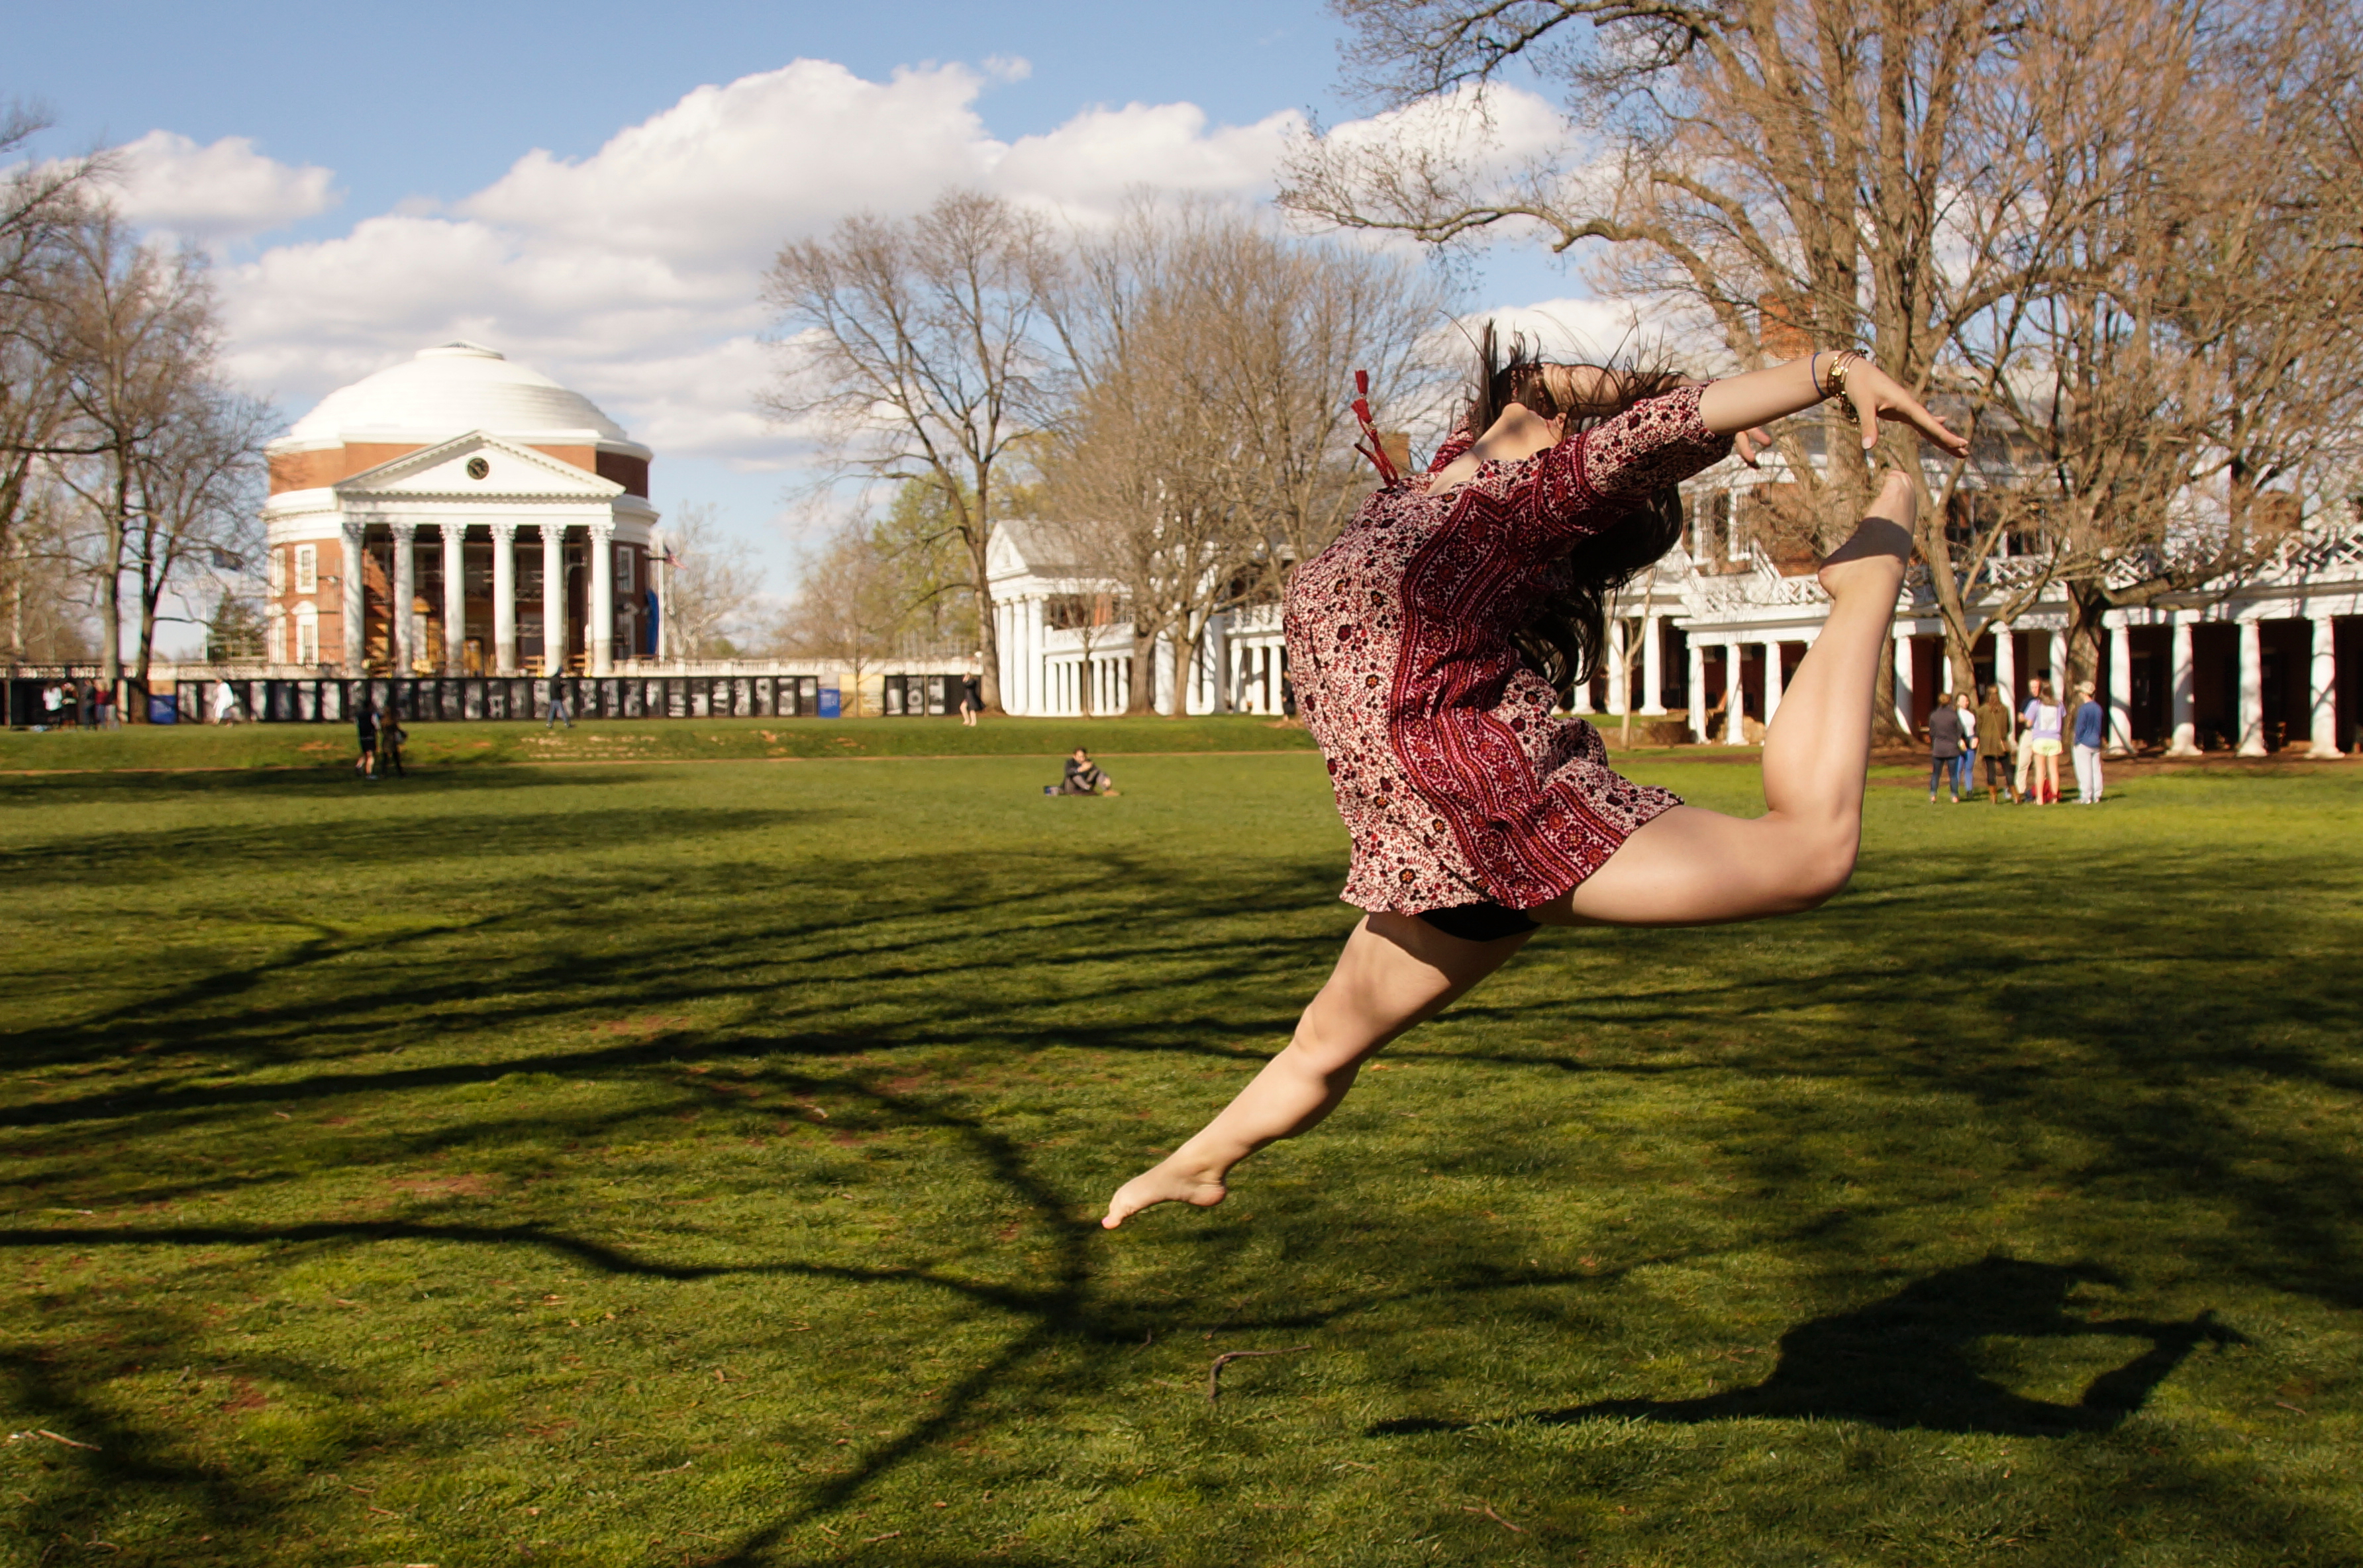 Woman on the Lawn jumps in the air tilts her head to the back and her arms out and bends one leg to almost touch her head.